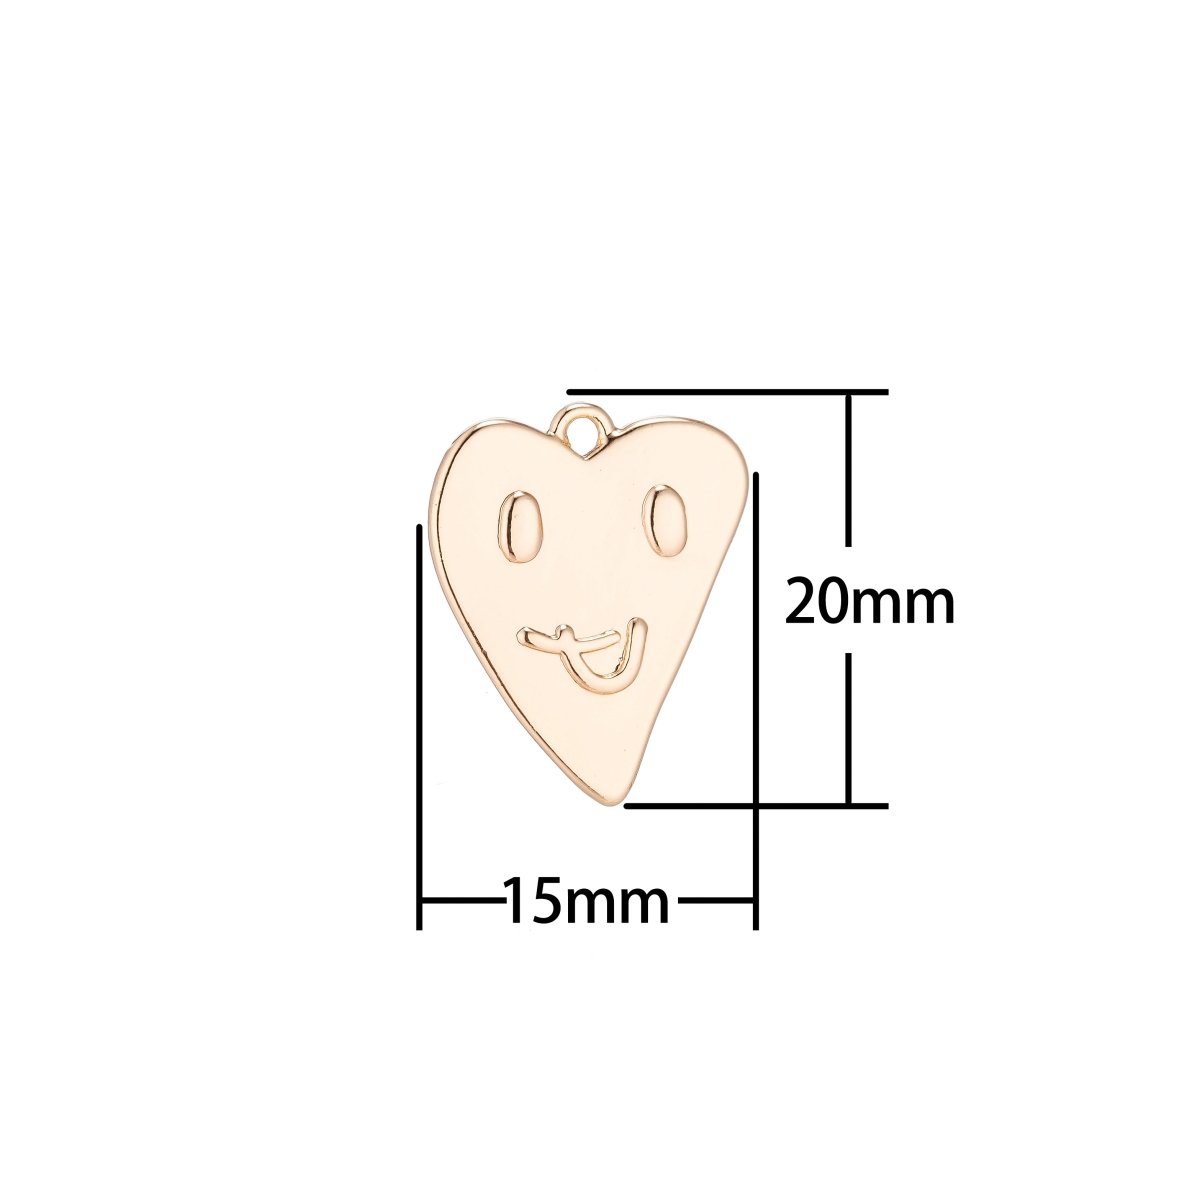 18K Gold Filled Heart shaped emoticon face pendant Coeur Charm for Layer Necklace Earing Jewelry Making Supplies - DLUXCA